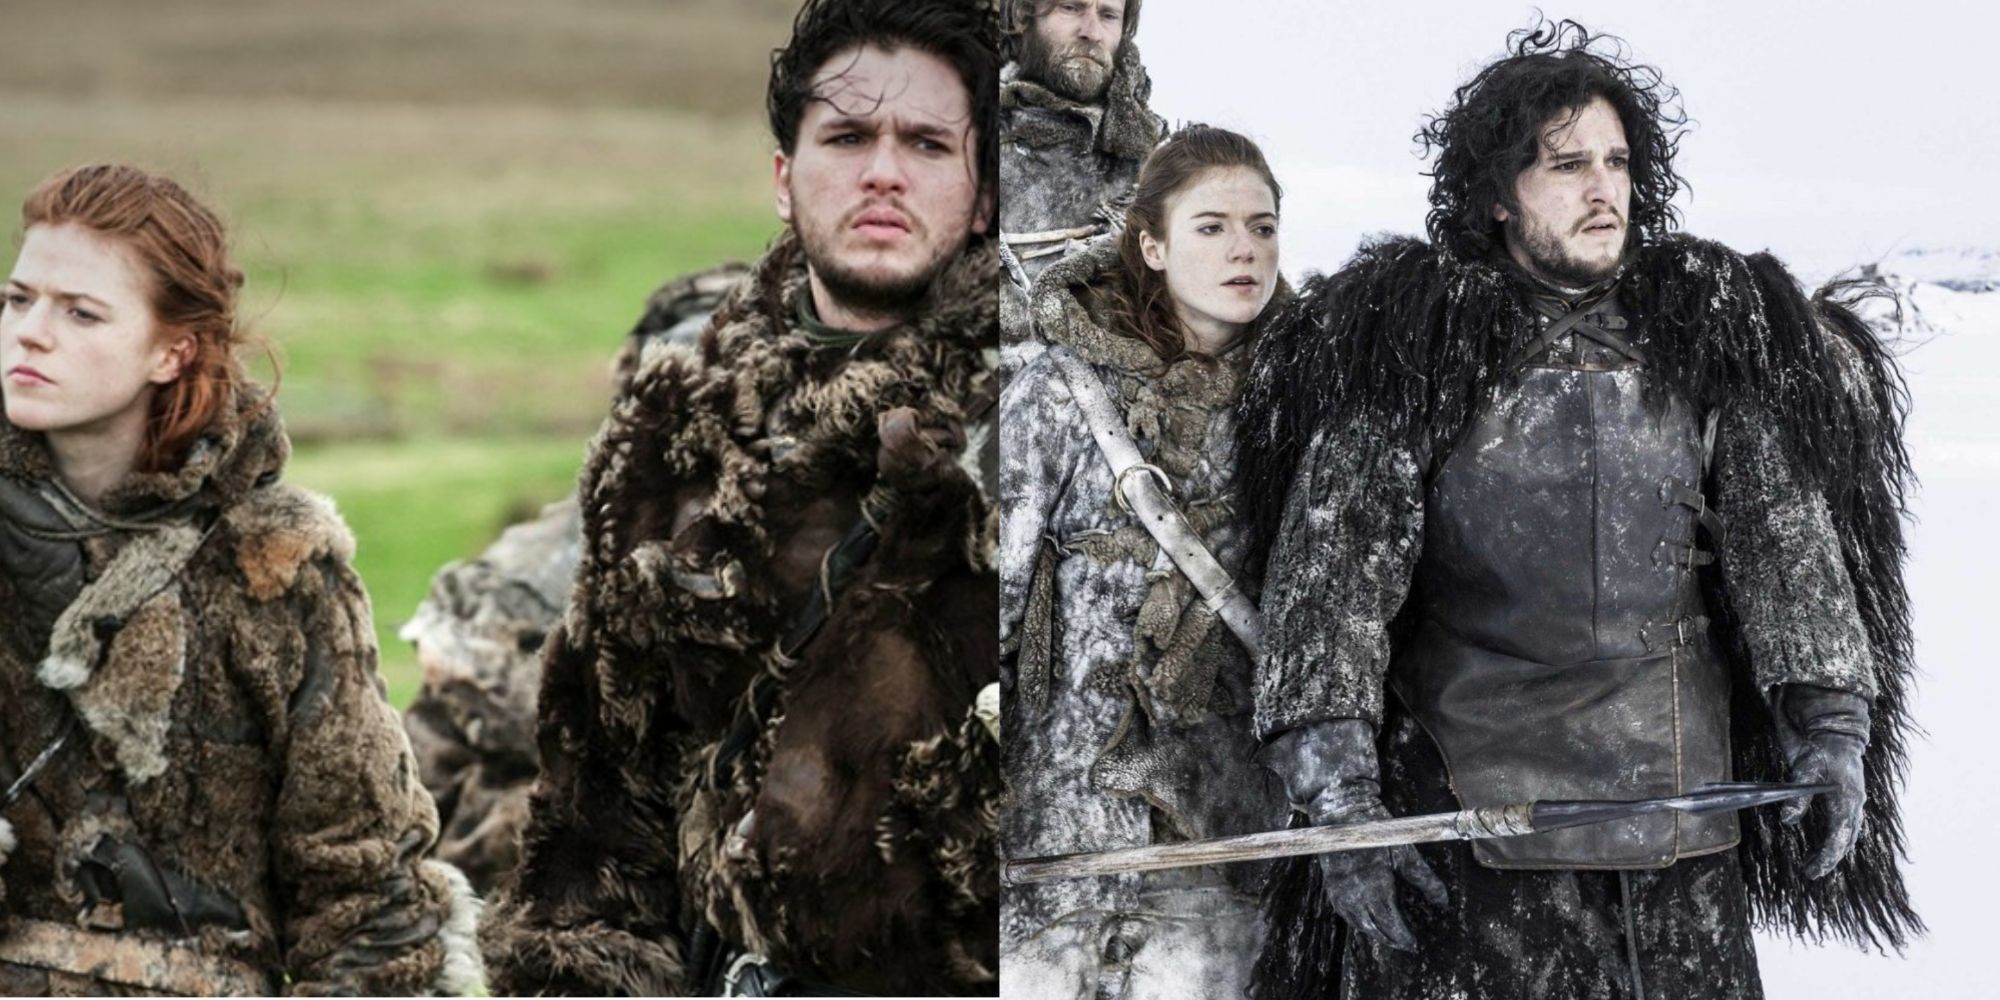 Split feature image showing Jon Snow and Ygritte from Game of Thrones.